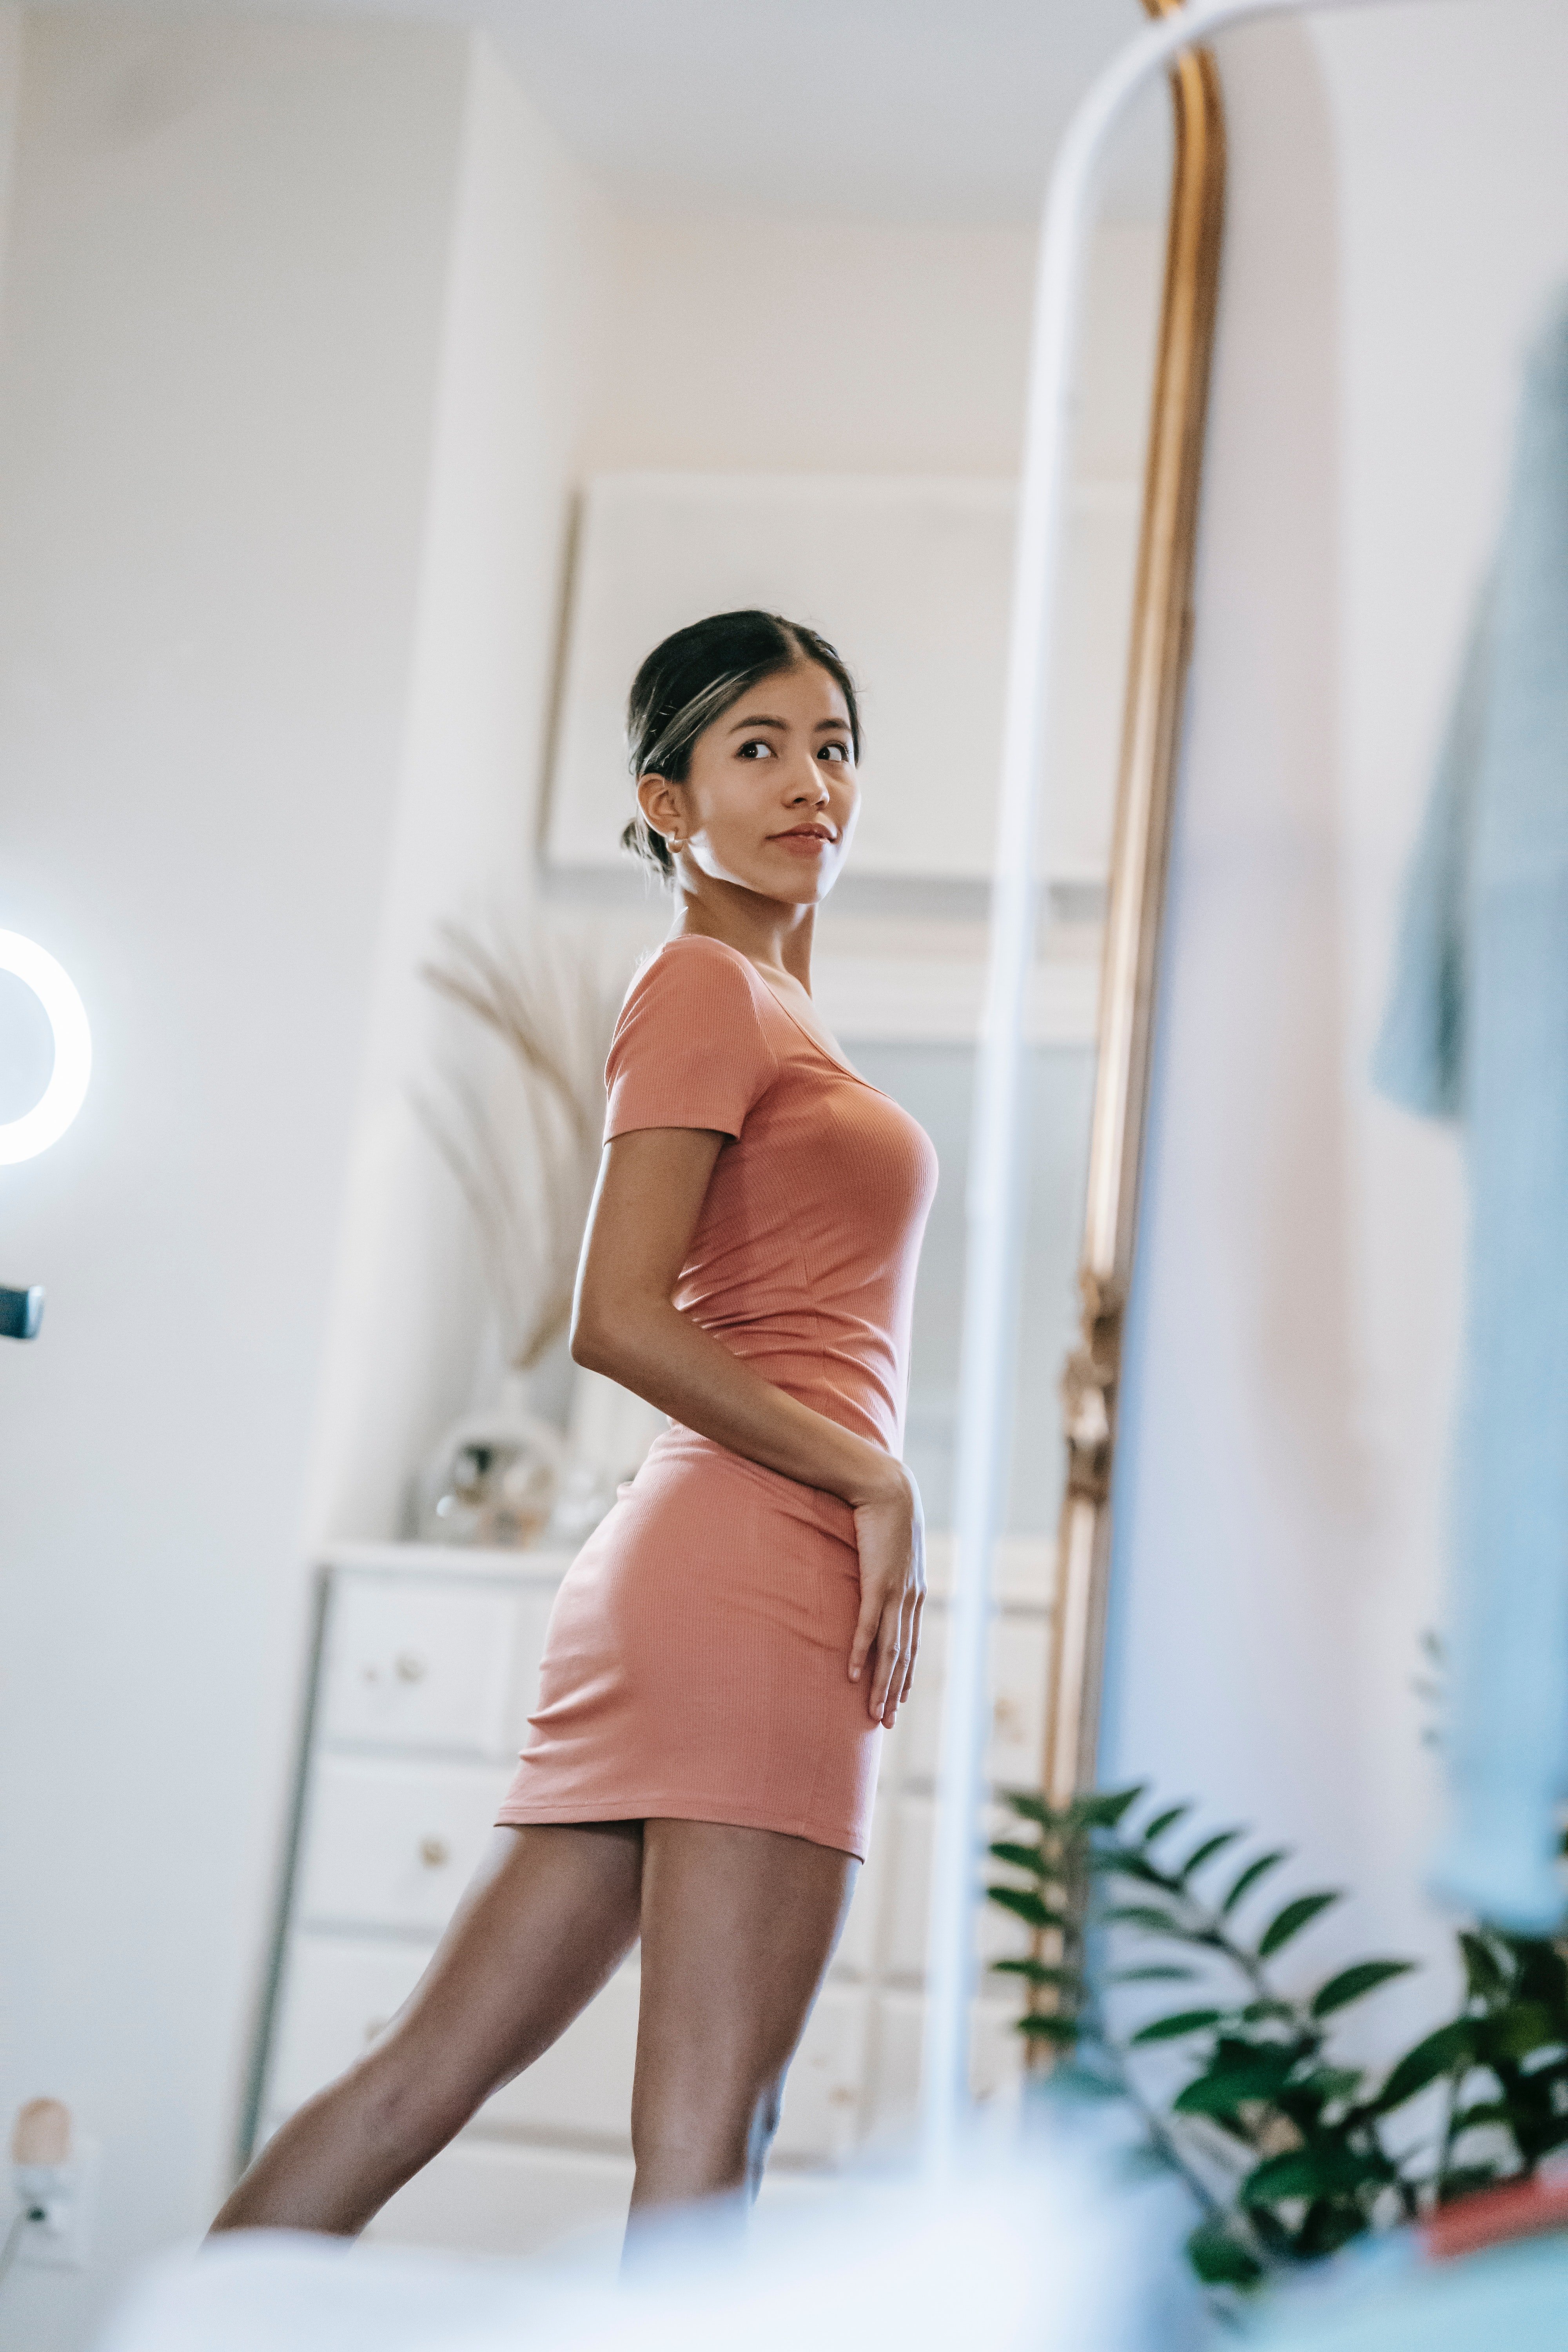 Gorgeous woman looking at a big mirror | Photo: Pexels